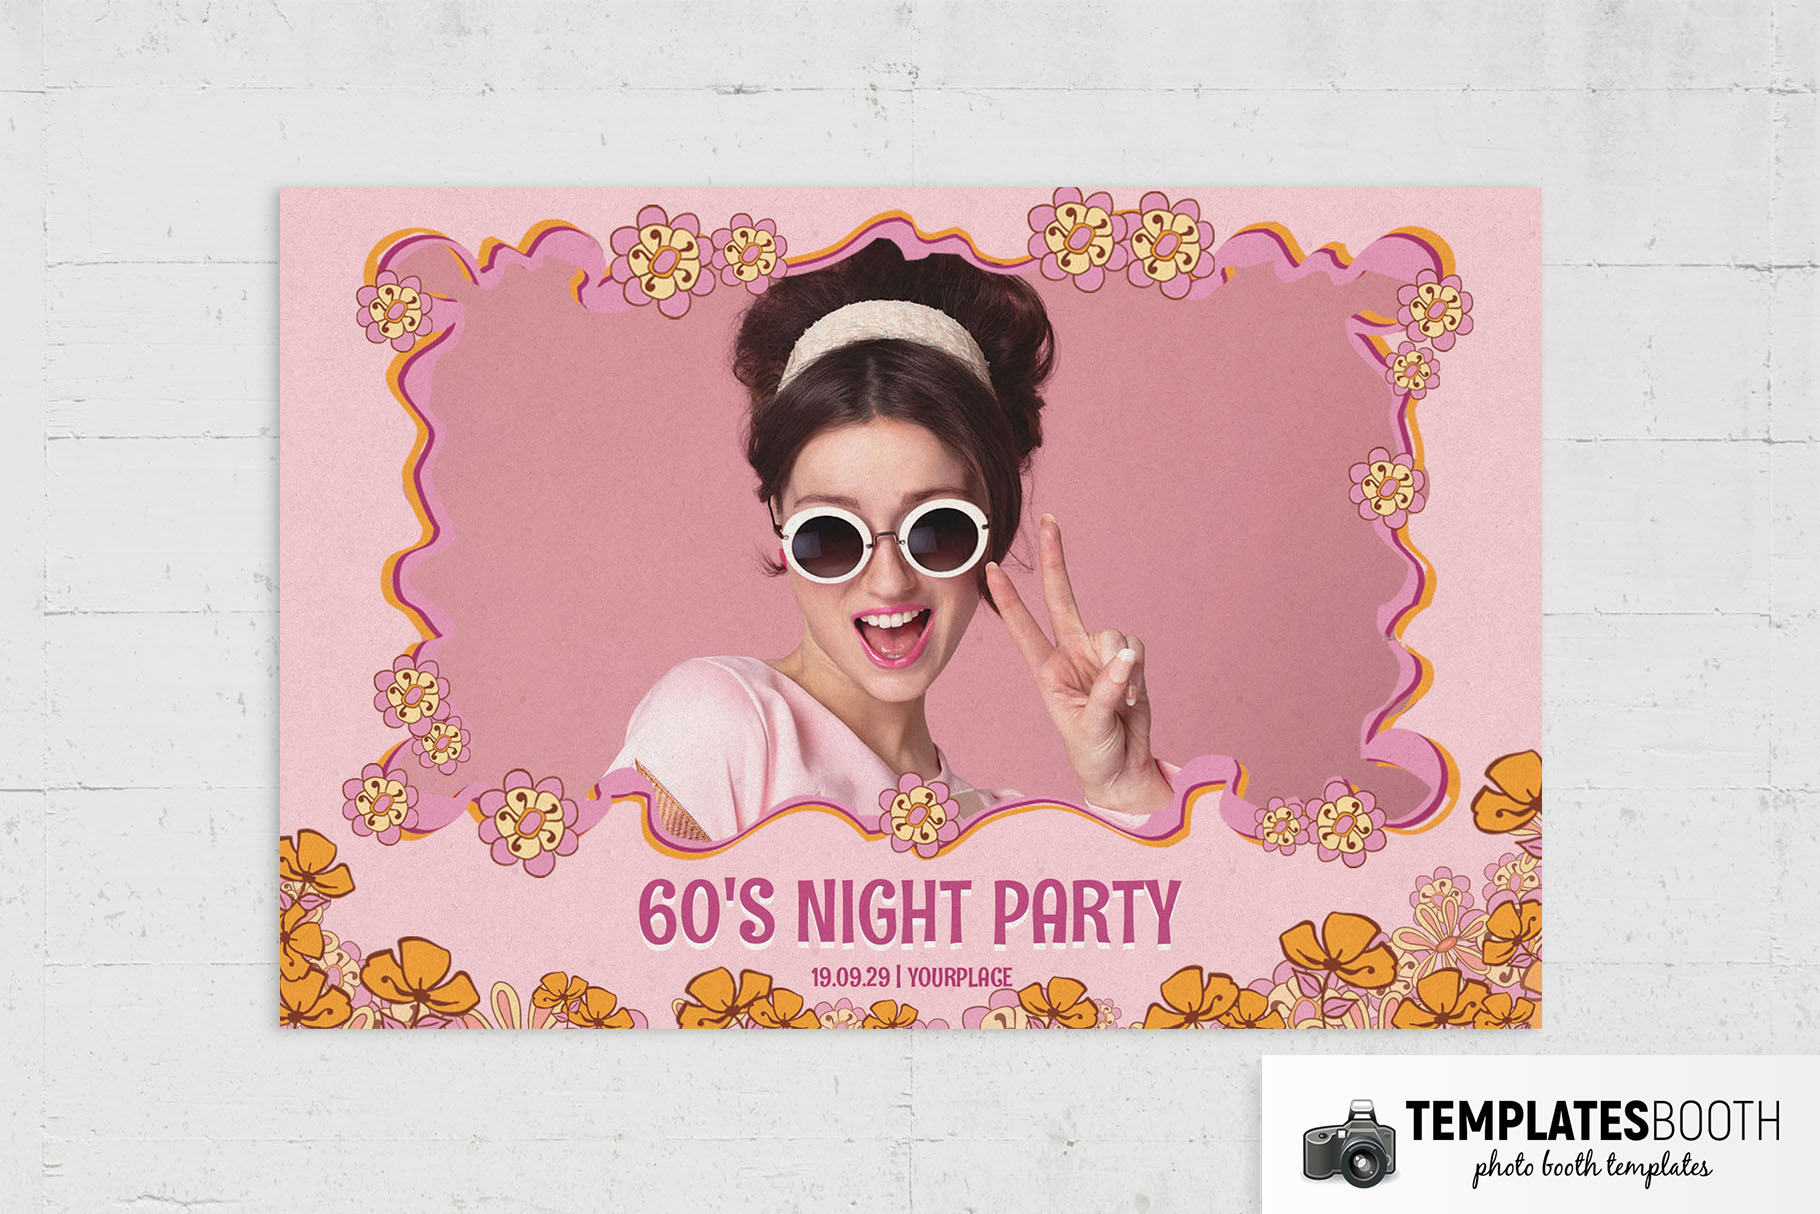 60s Night Photo Booth Template